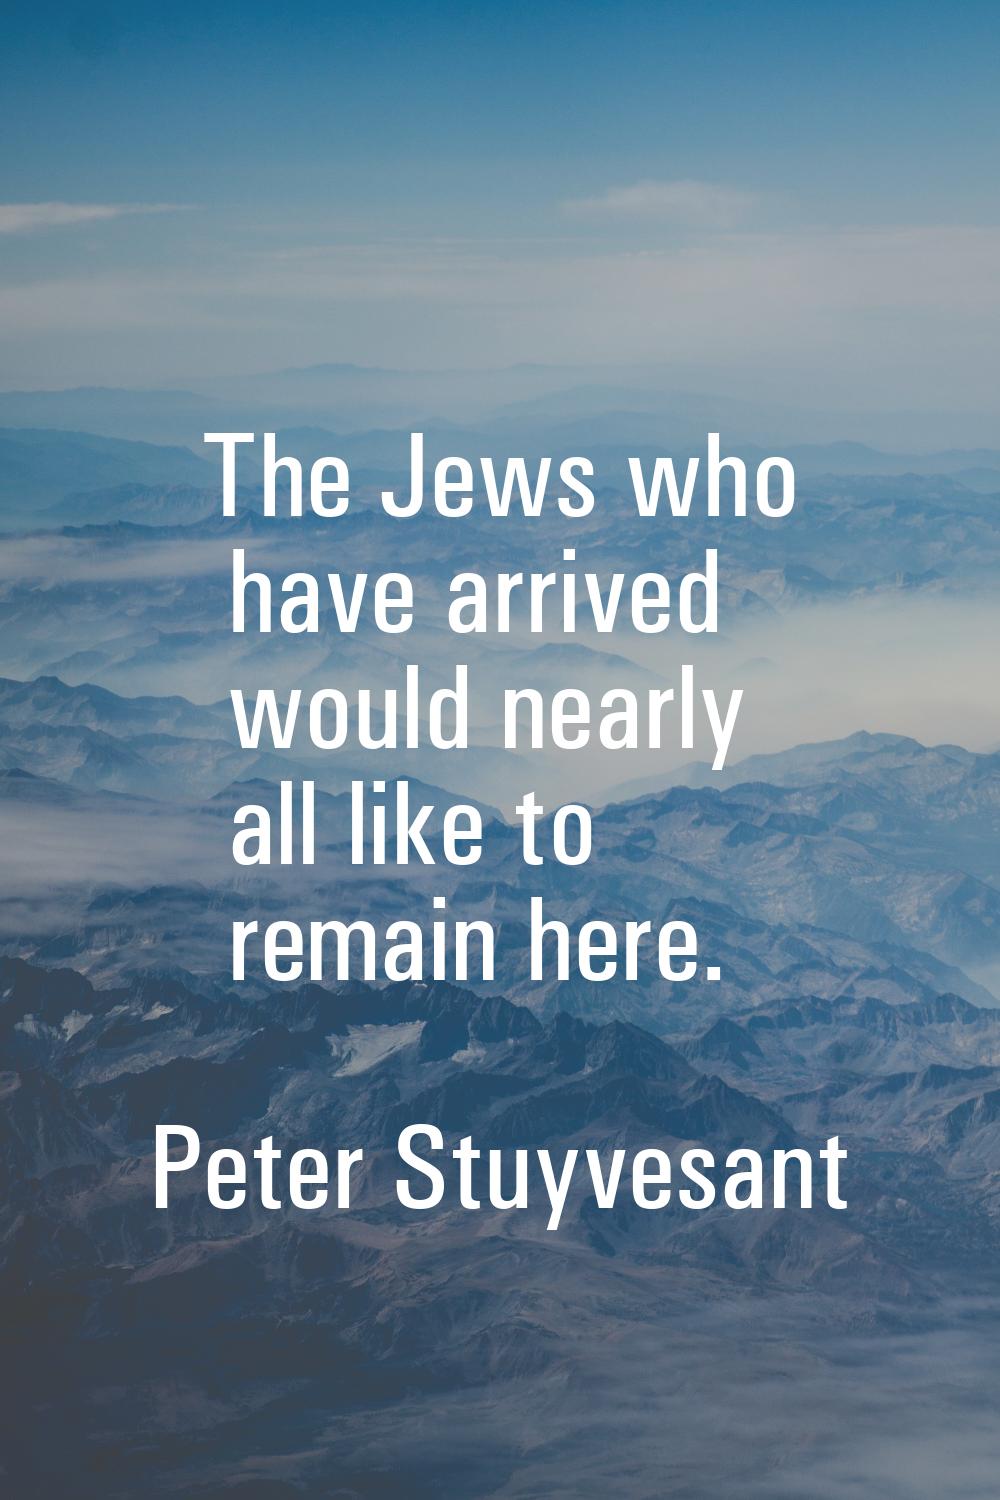 The Jews who have arrived would nearly all like to remain here.